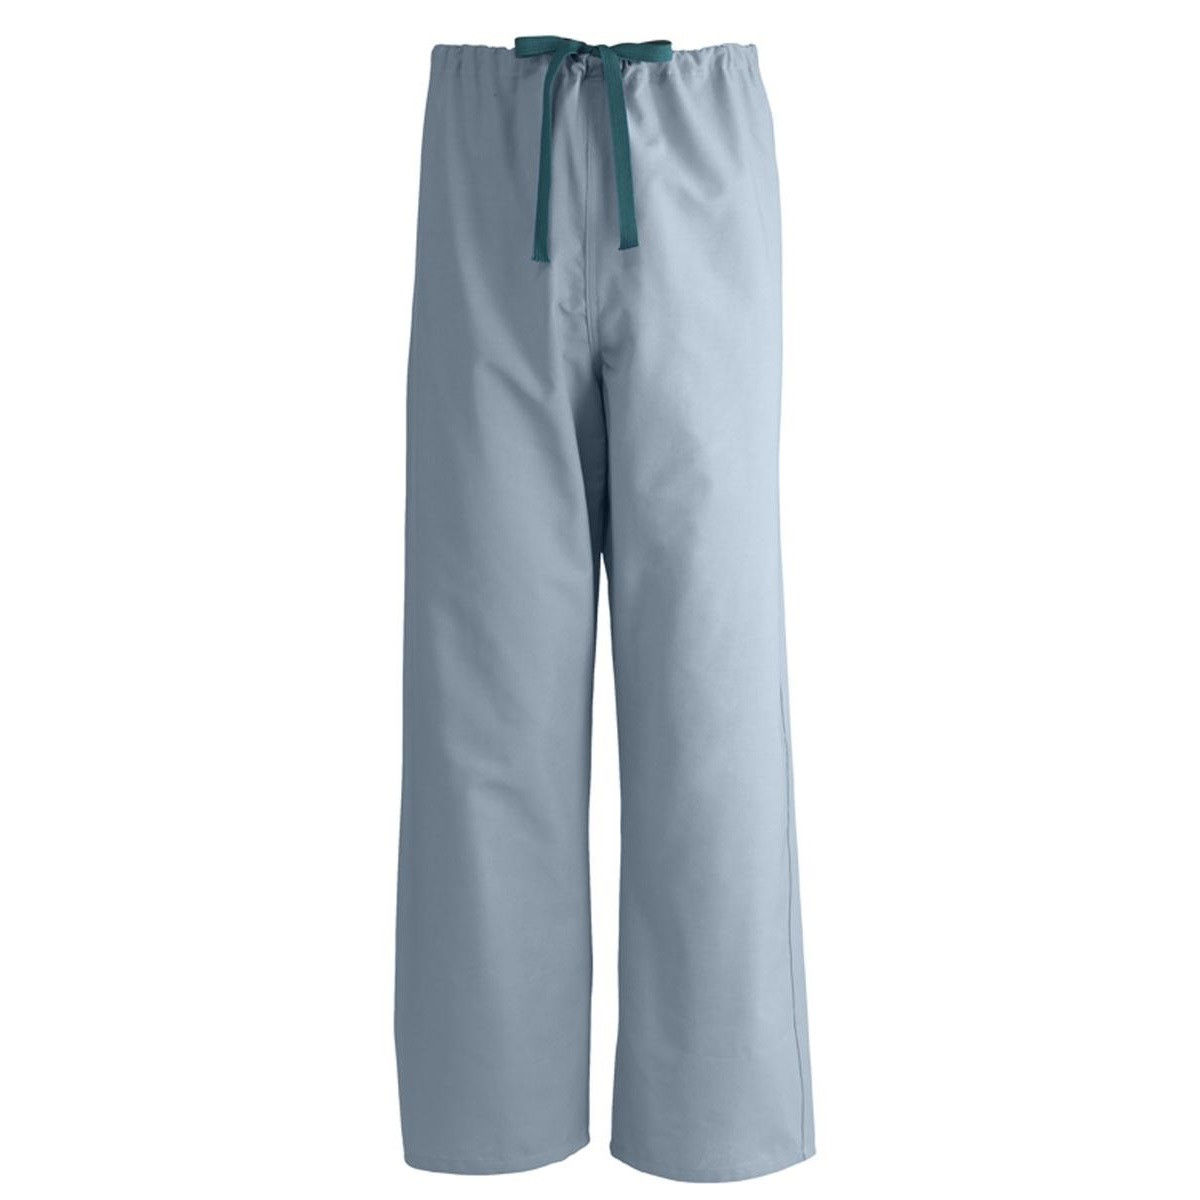 What advantages do misty green scrubs offer, specifically EconoBlen™ fabric?